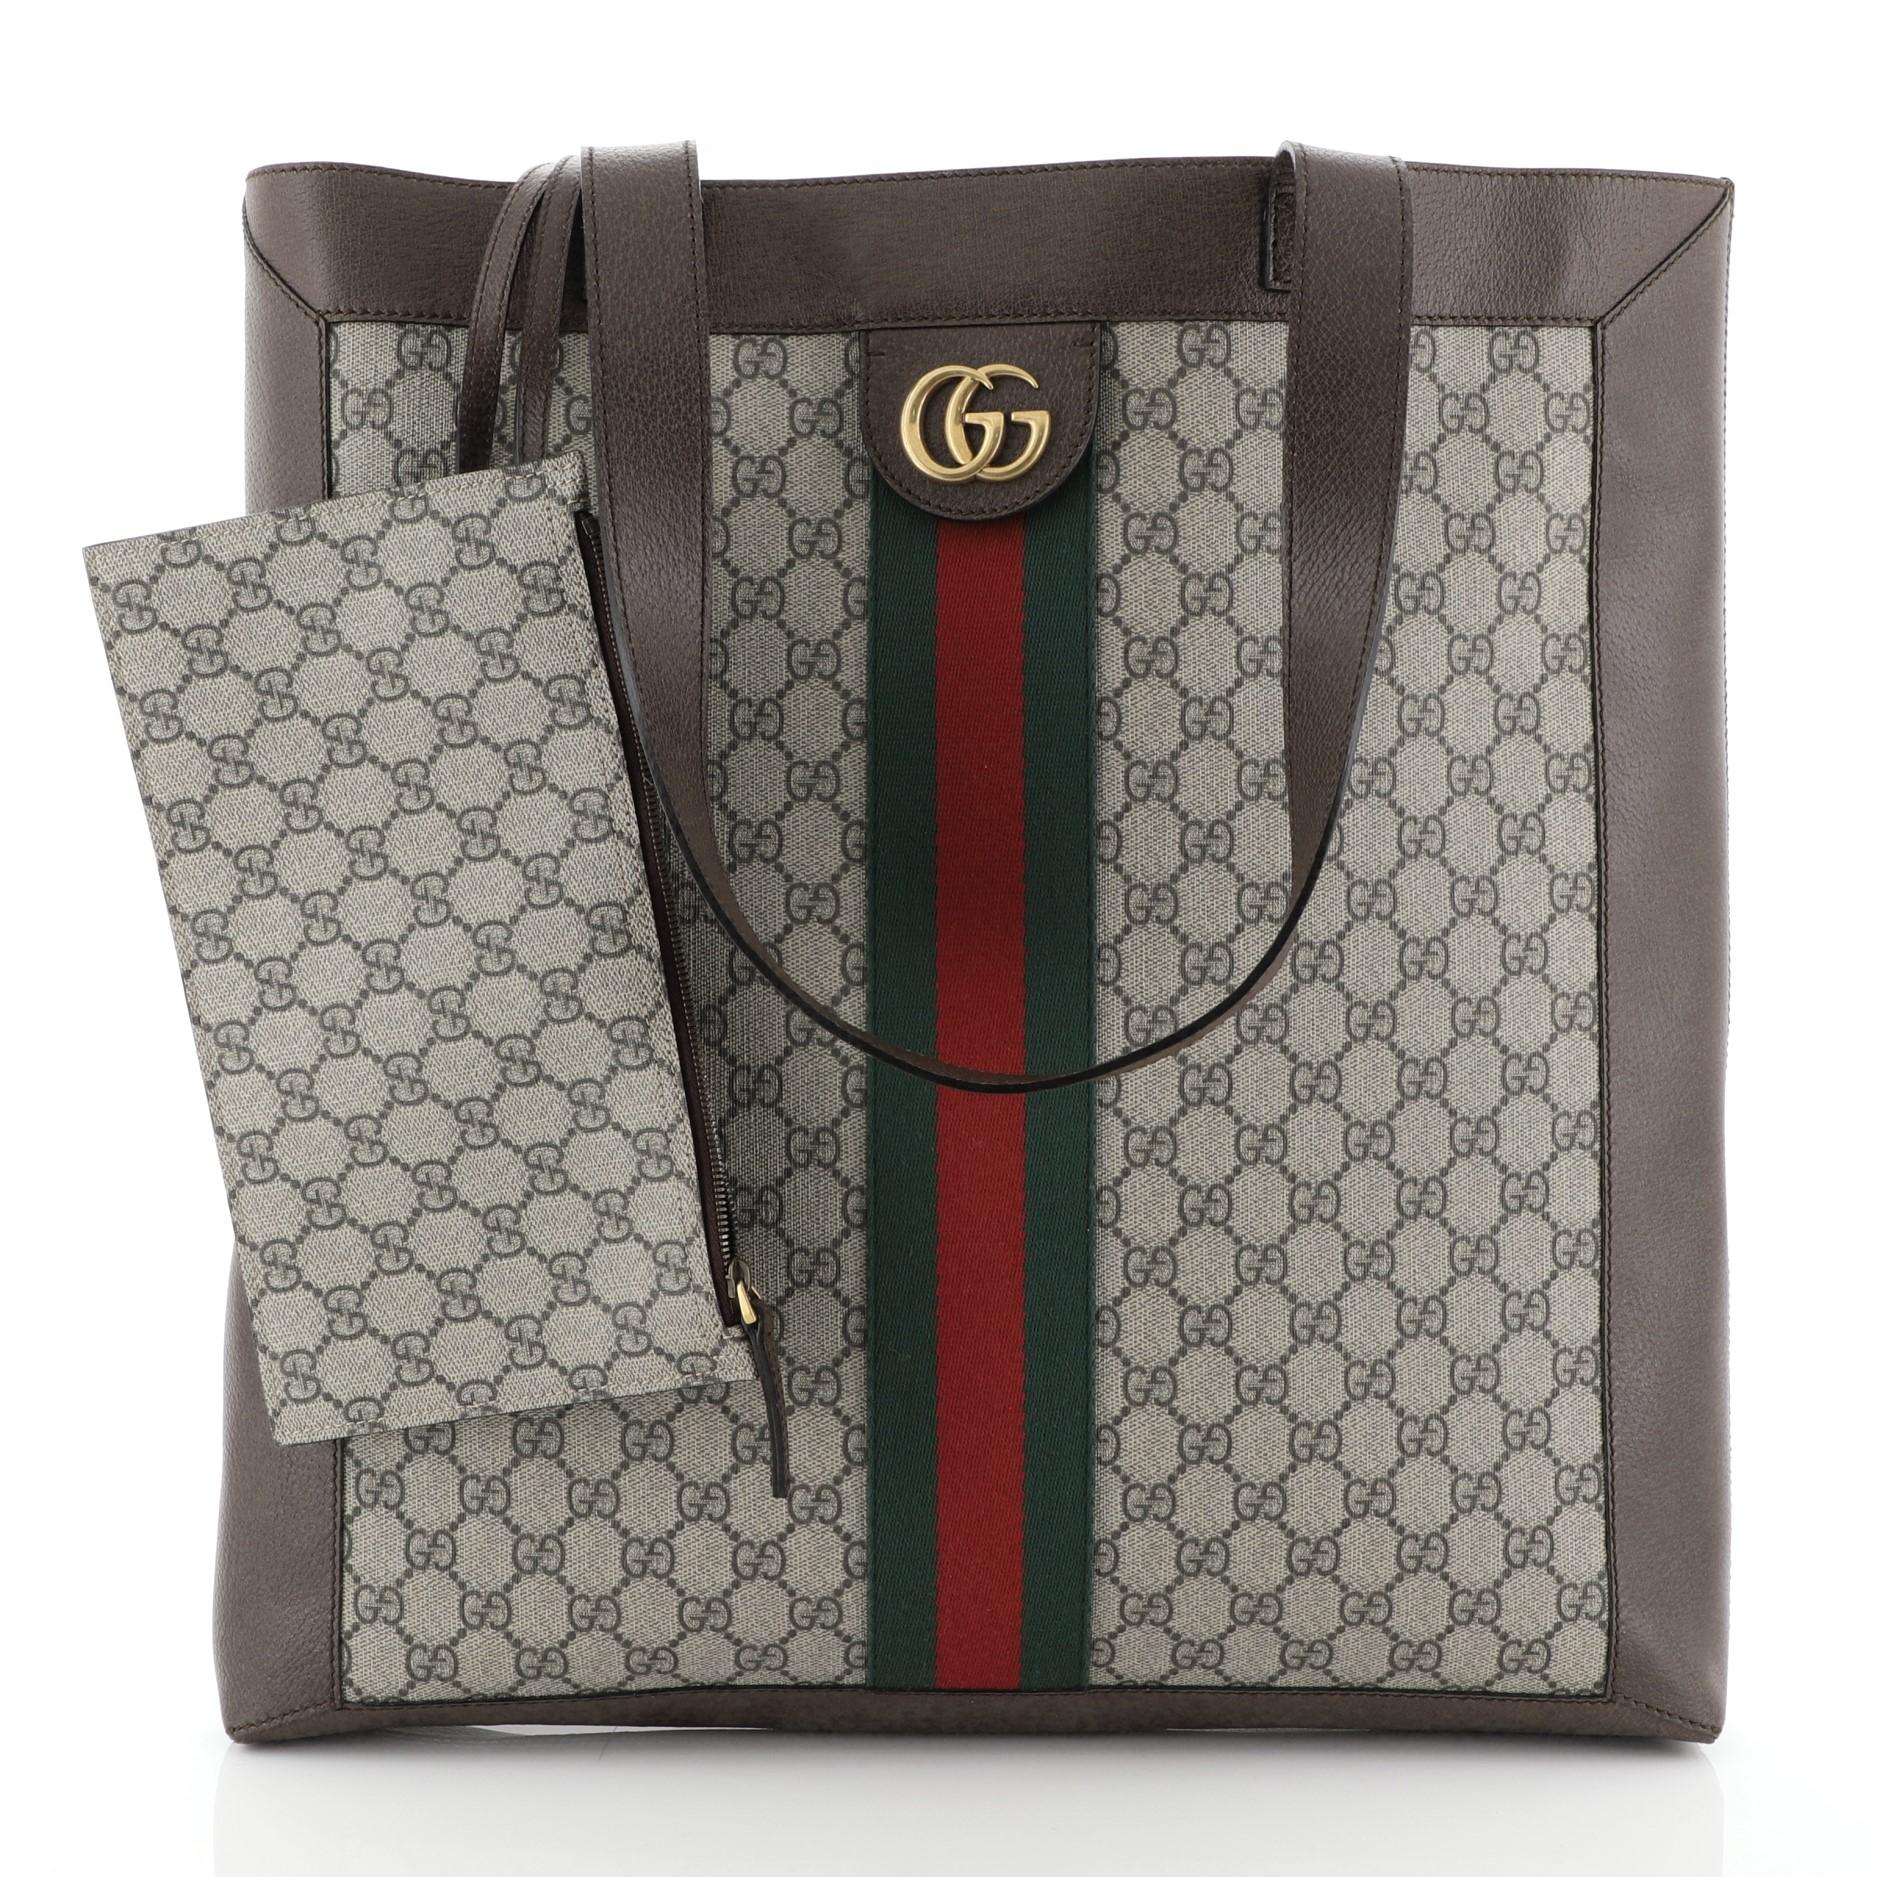 This Gucci Ophidia Soft Open Tote GG Coated Canvas Large, crafted in brown GG coated canvas, features dual leather shoulder straps, Gucci web design, and aged gold-tone hardware. It opens to a neutral microfiber interior. 

Estimated Retail Price: